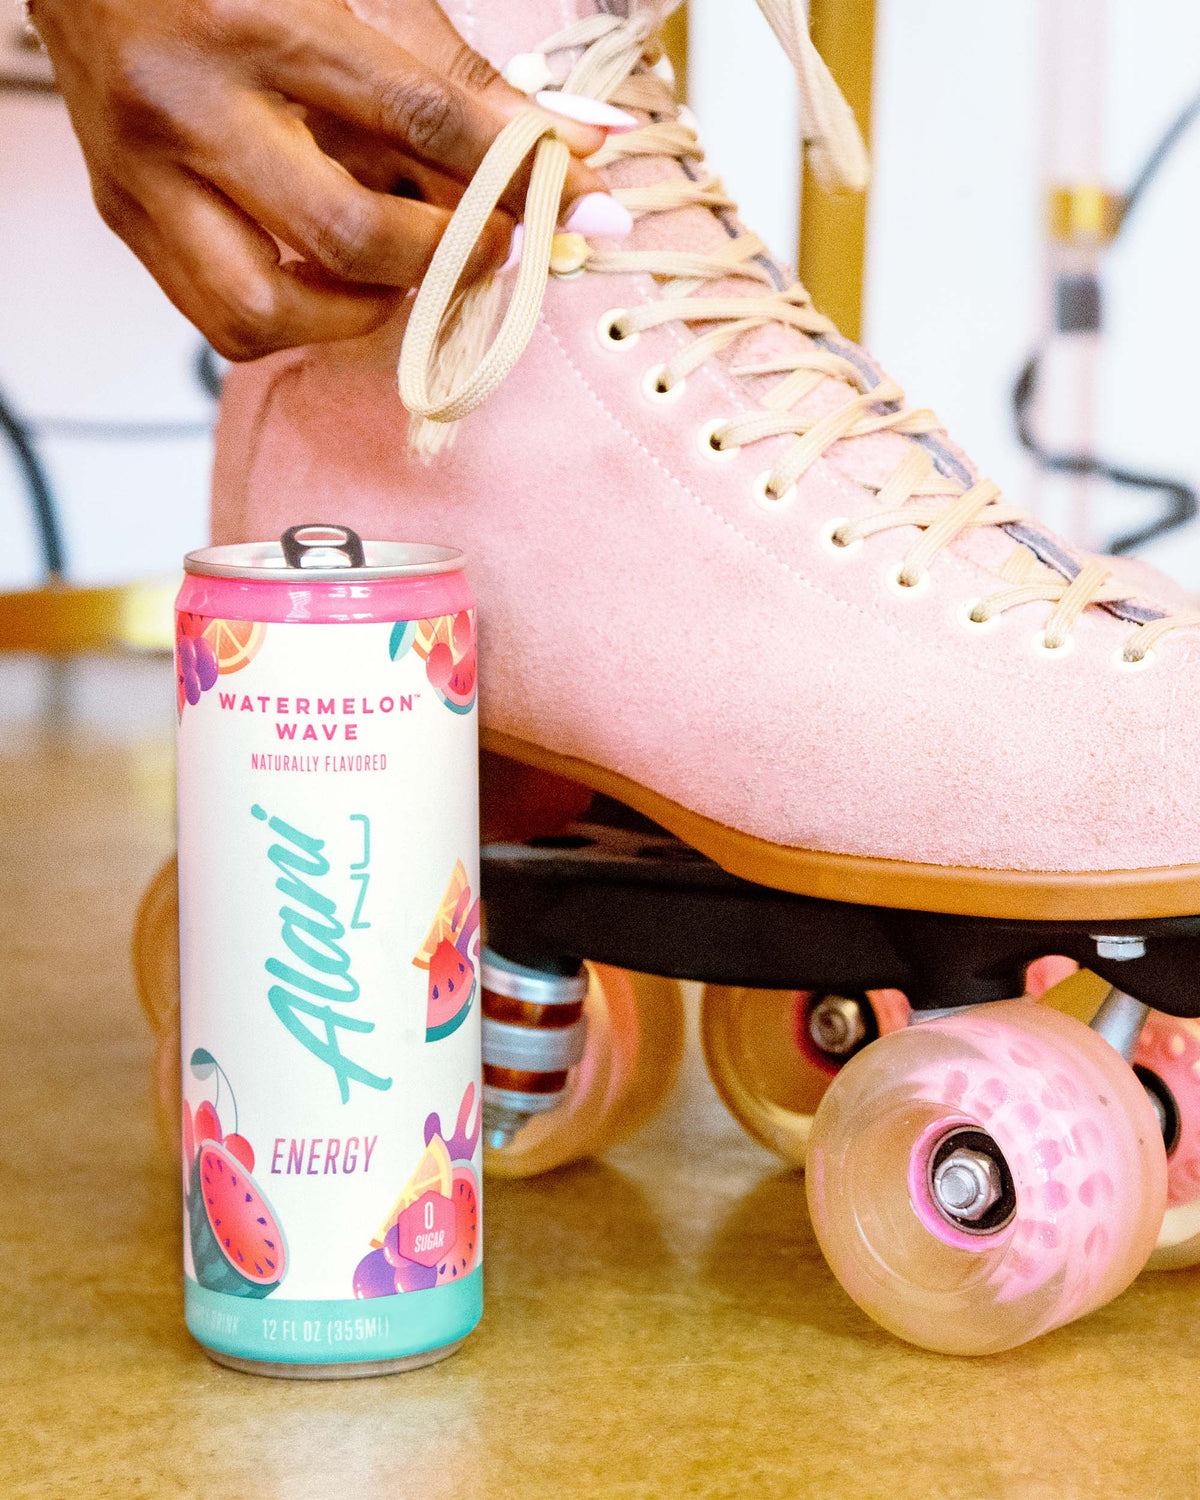 A pink roller skate next to Energy Drink in Watermelon Wave flavor.